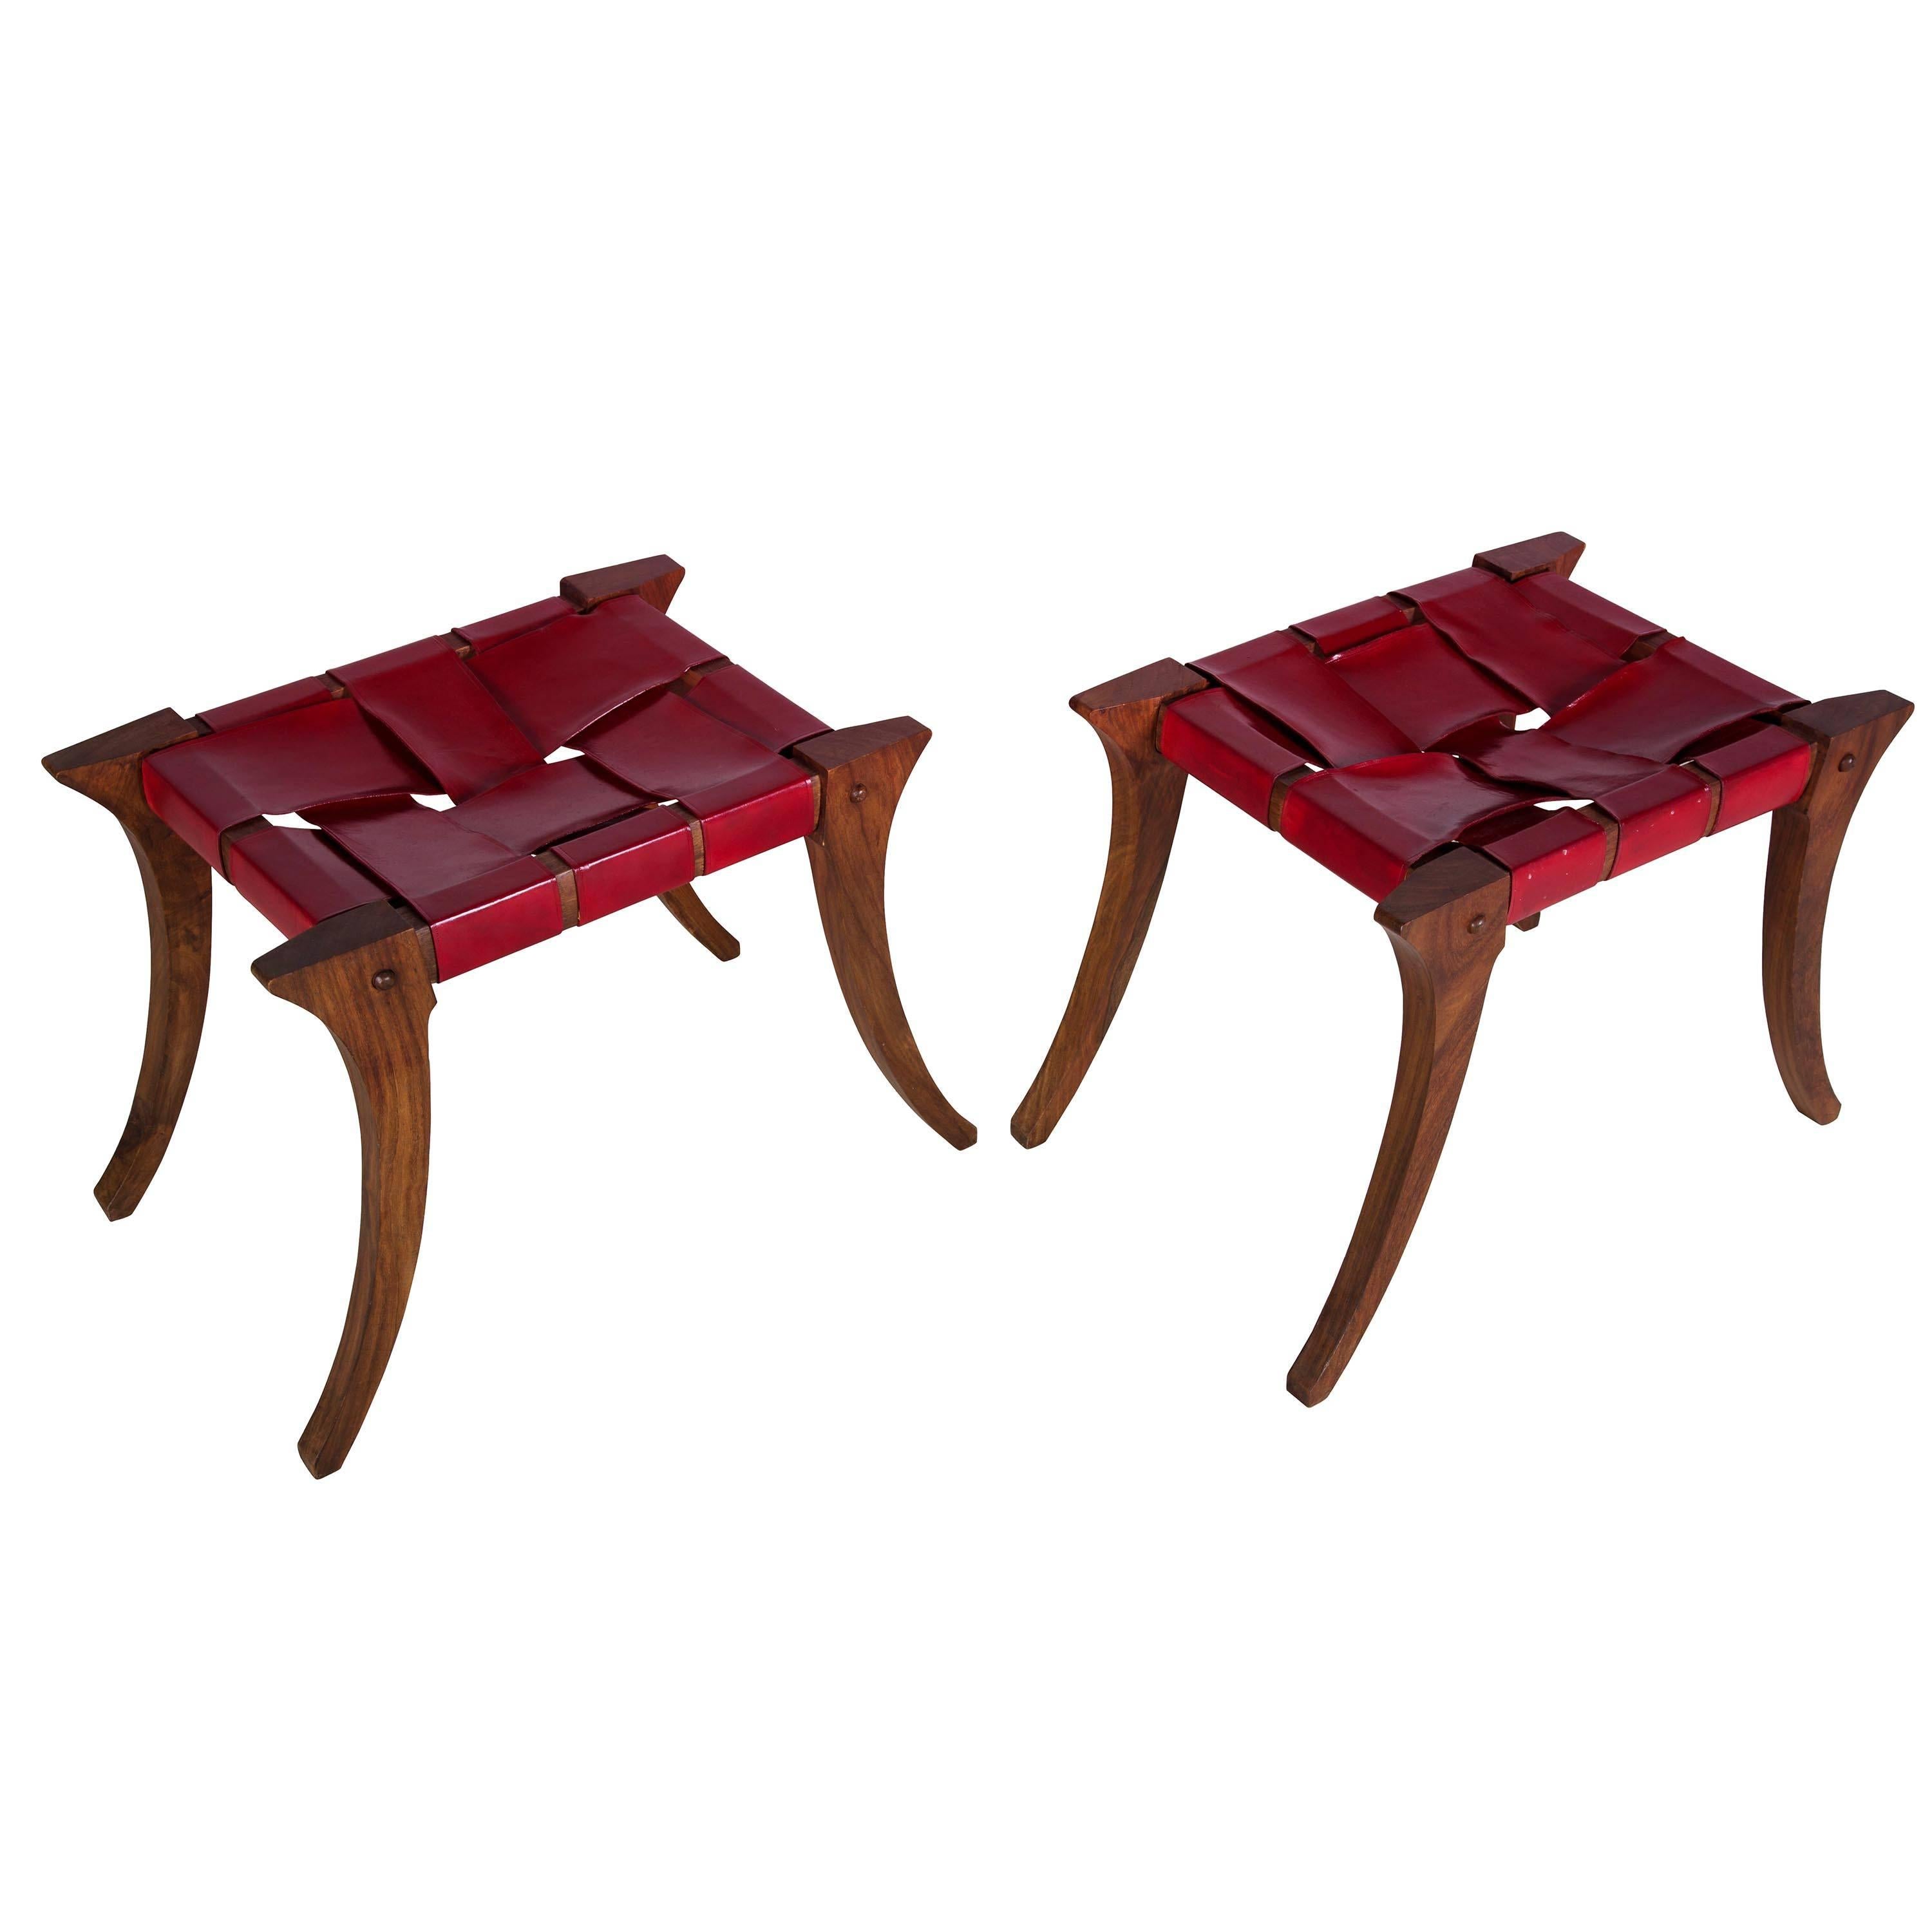 Pair of Klismos stools in the manner of T. H. Robsjohn-Gibbings, circa 1950s. Worn leather seats which have been stained red at a later date.